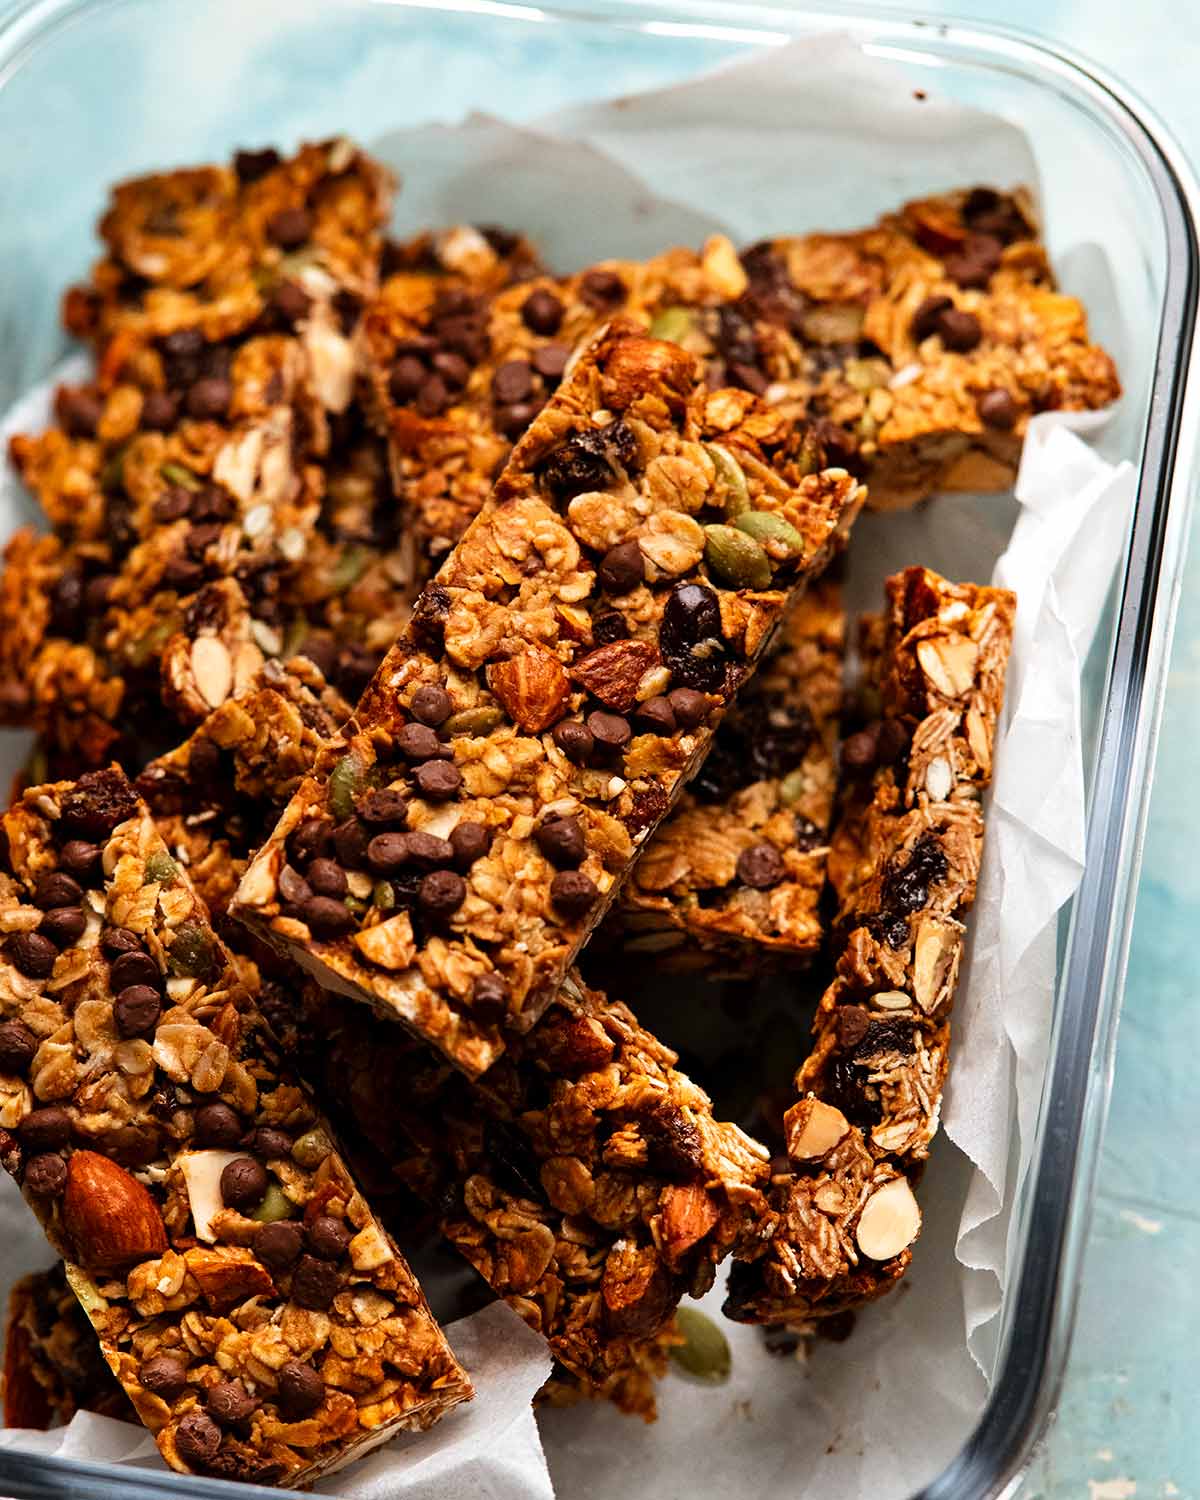 How to store Crunchy muesli bars so they stay crunchy